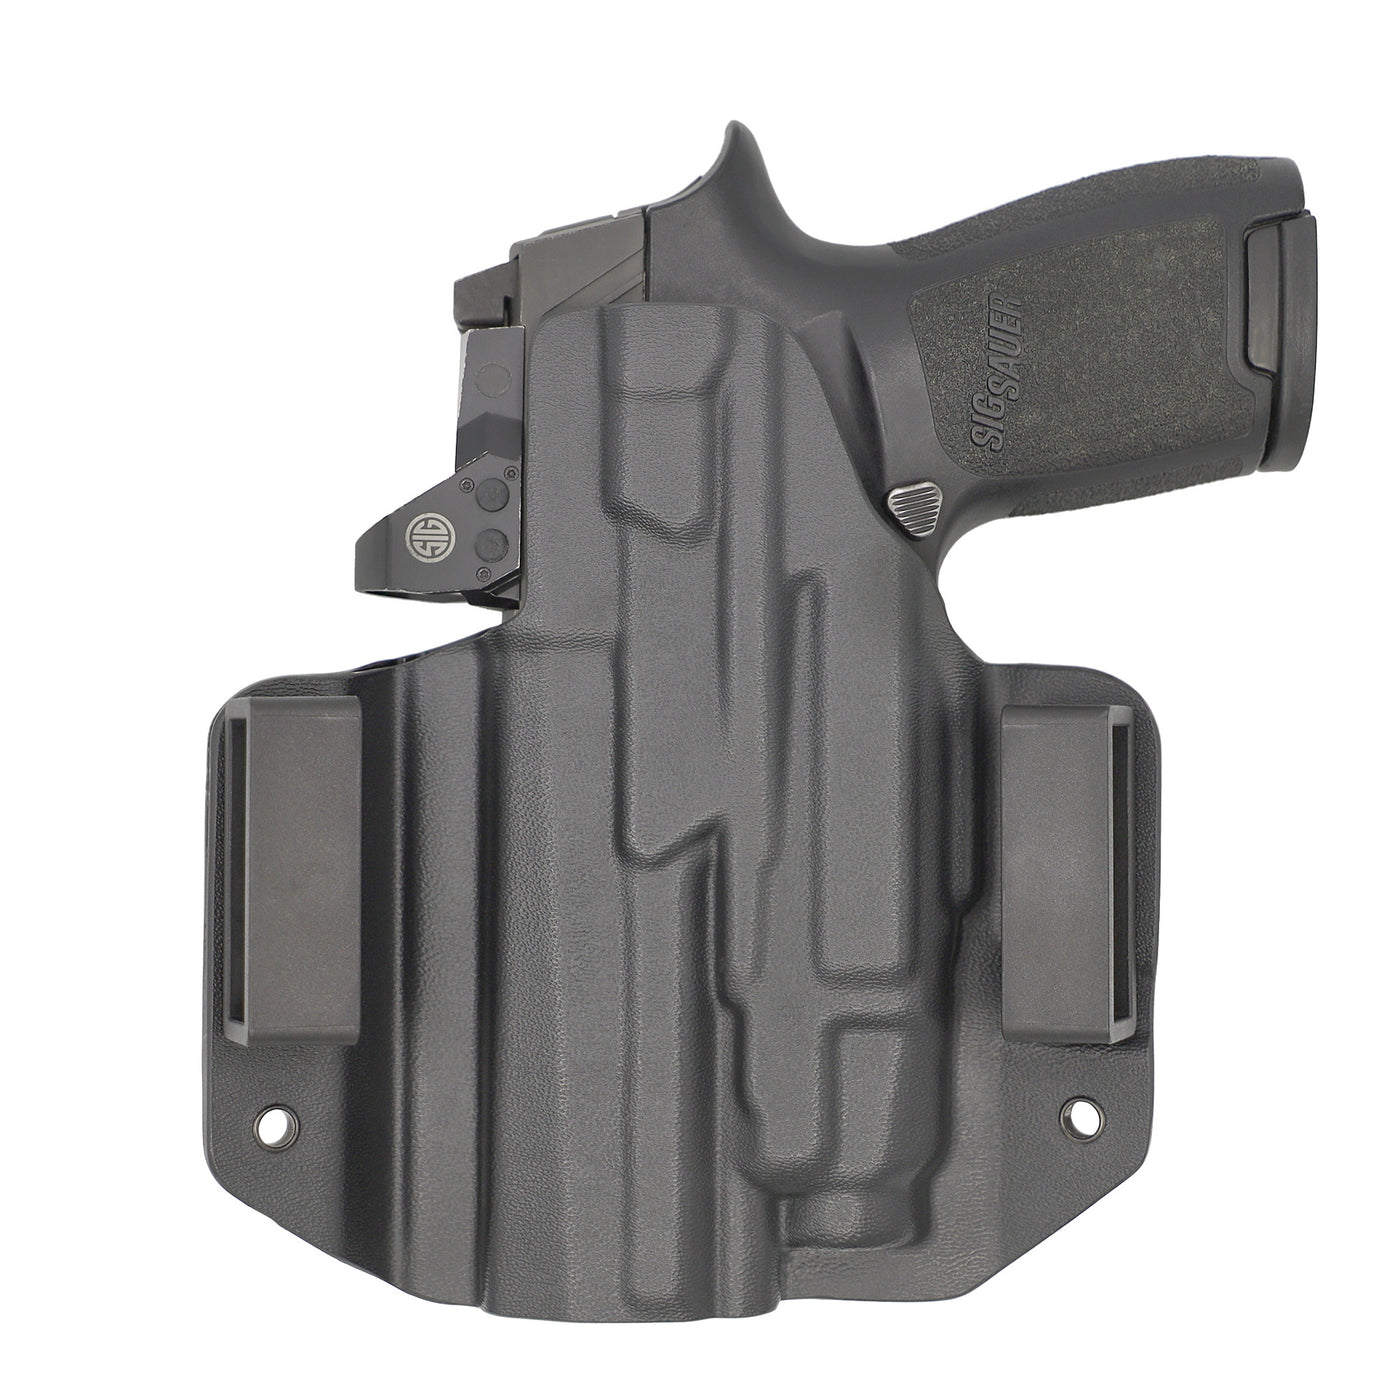 C&G Holsters custom OWB Tactical Masada streamlight tlr7/a in holstered position back view